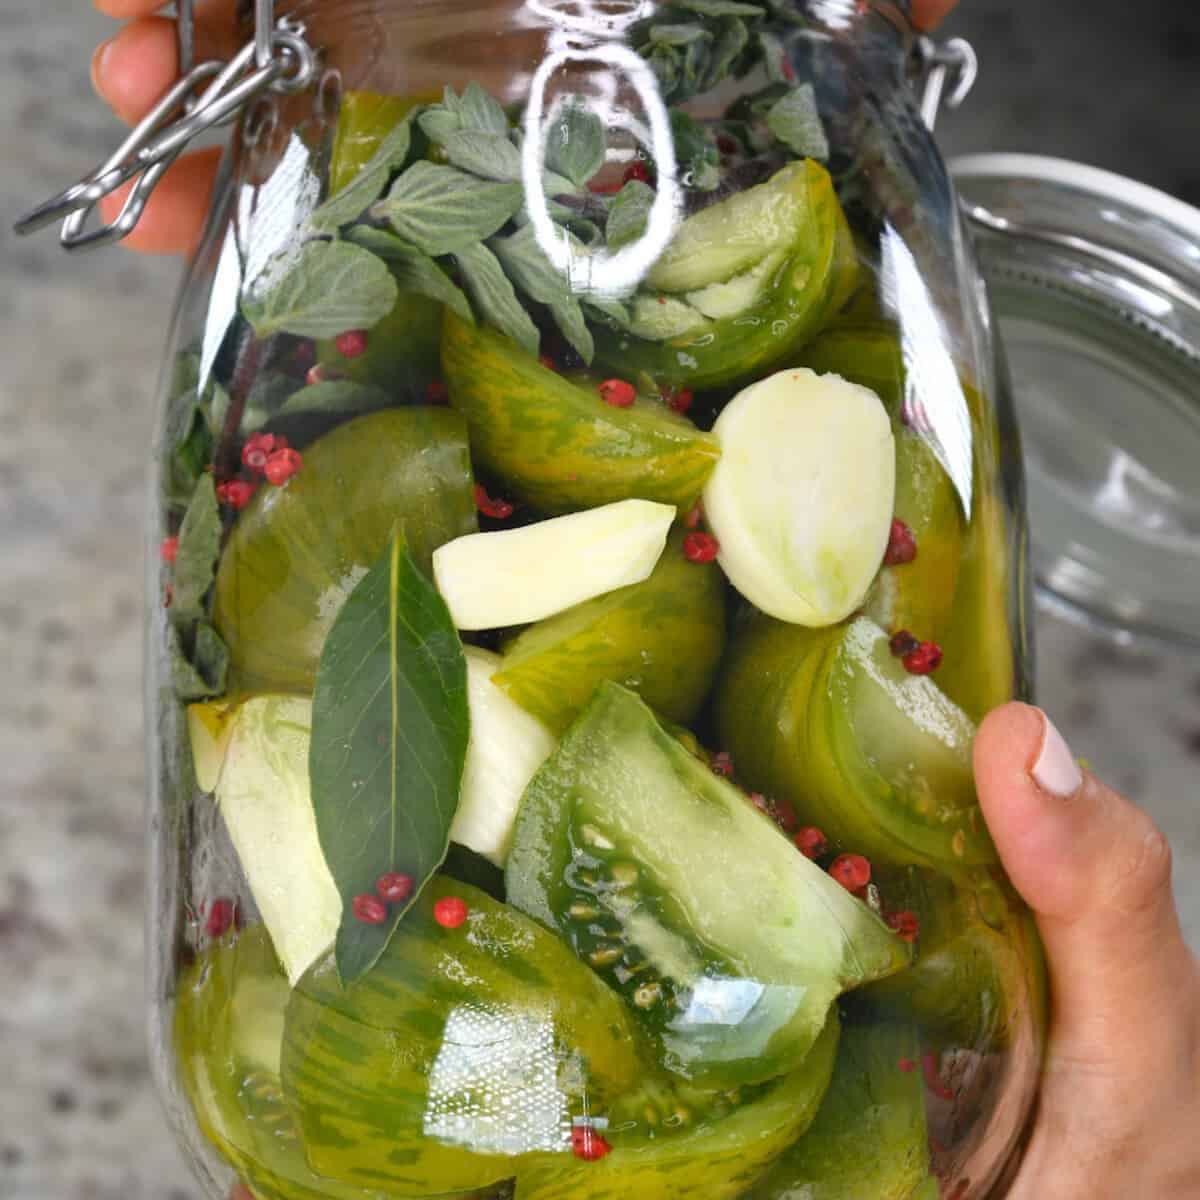 https://www.alphafoodie.com/wp-content/uploads/2021/07/Pickled-Green-Tomatoes-square.jpeg